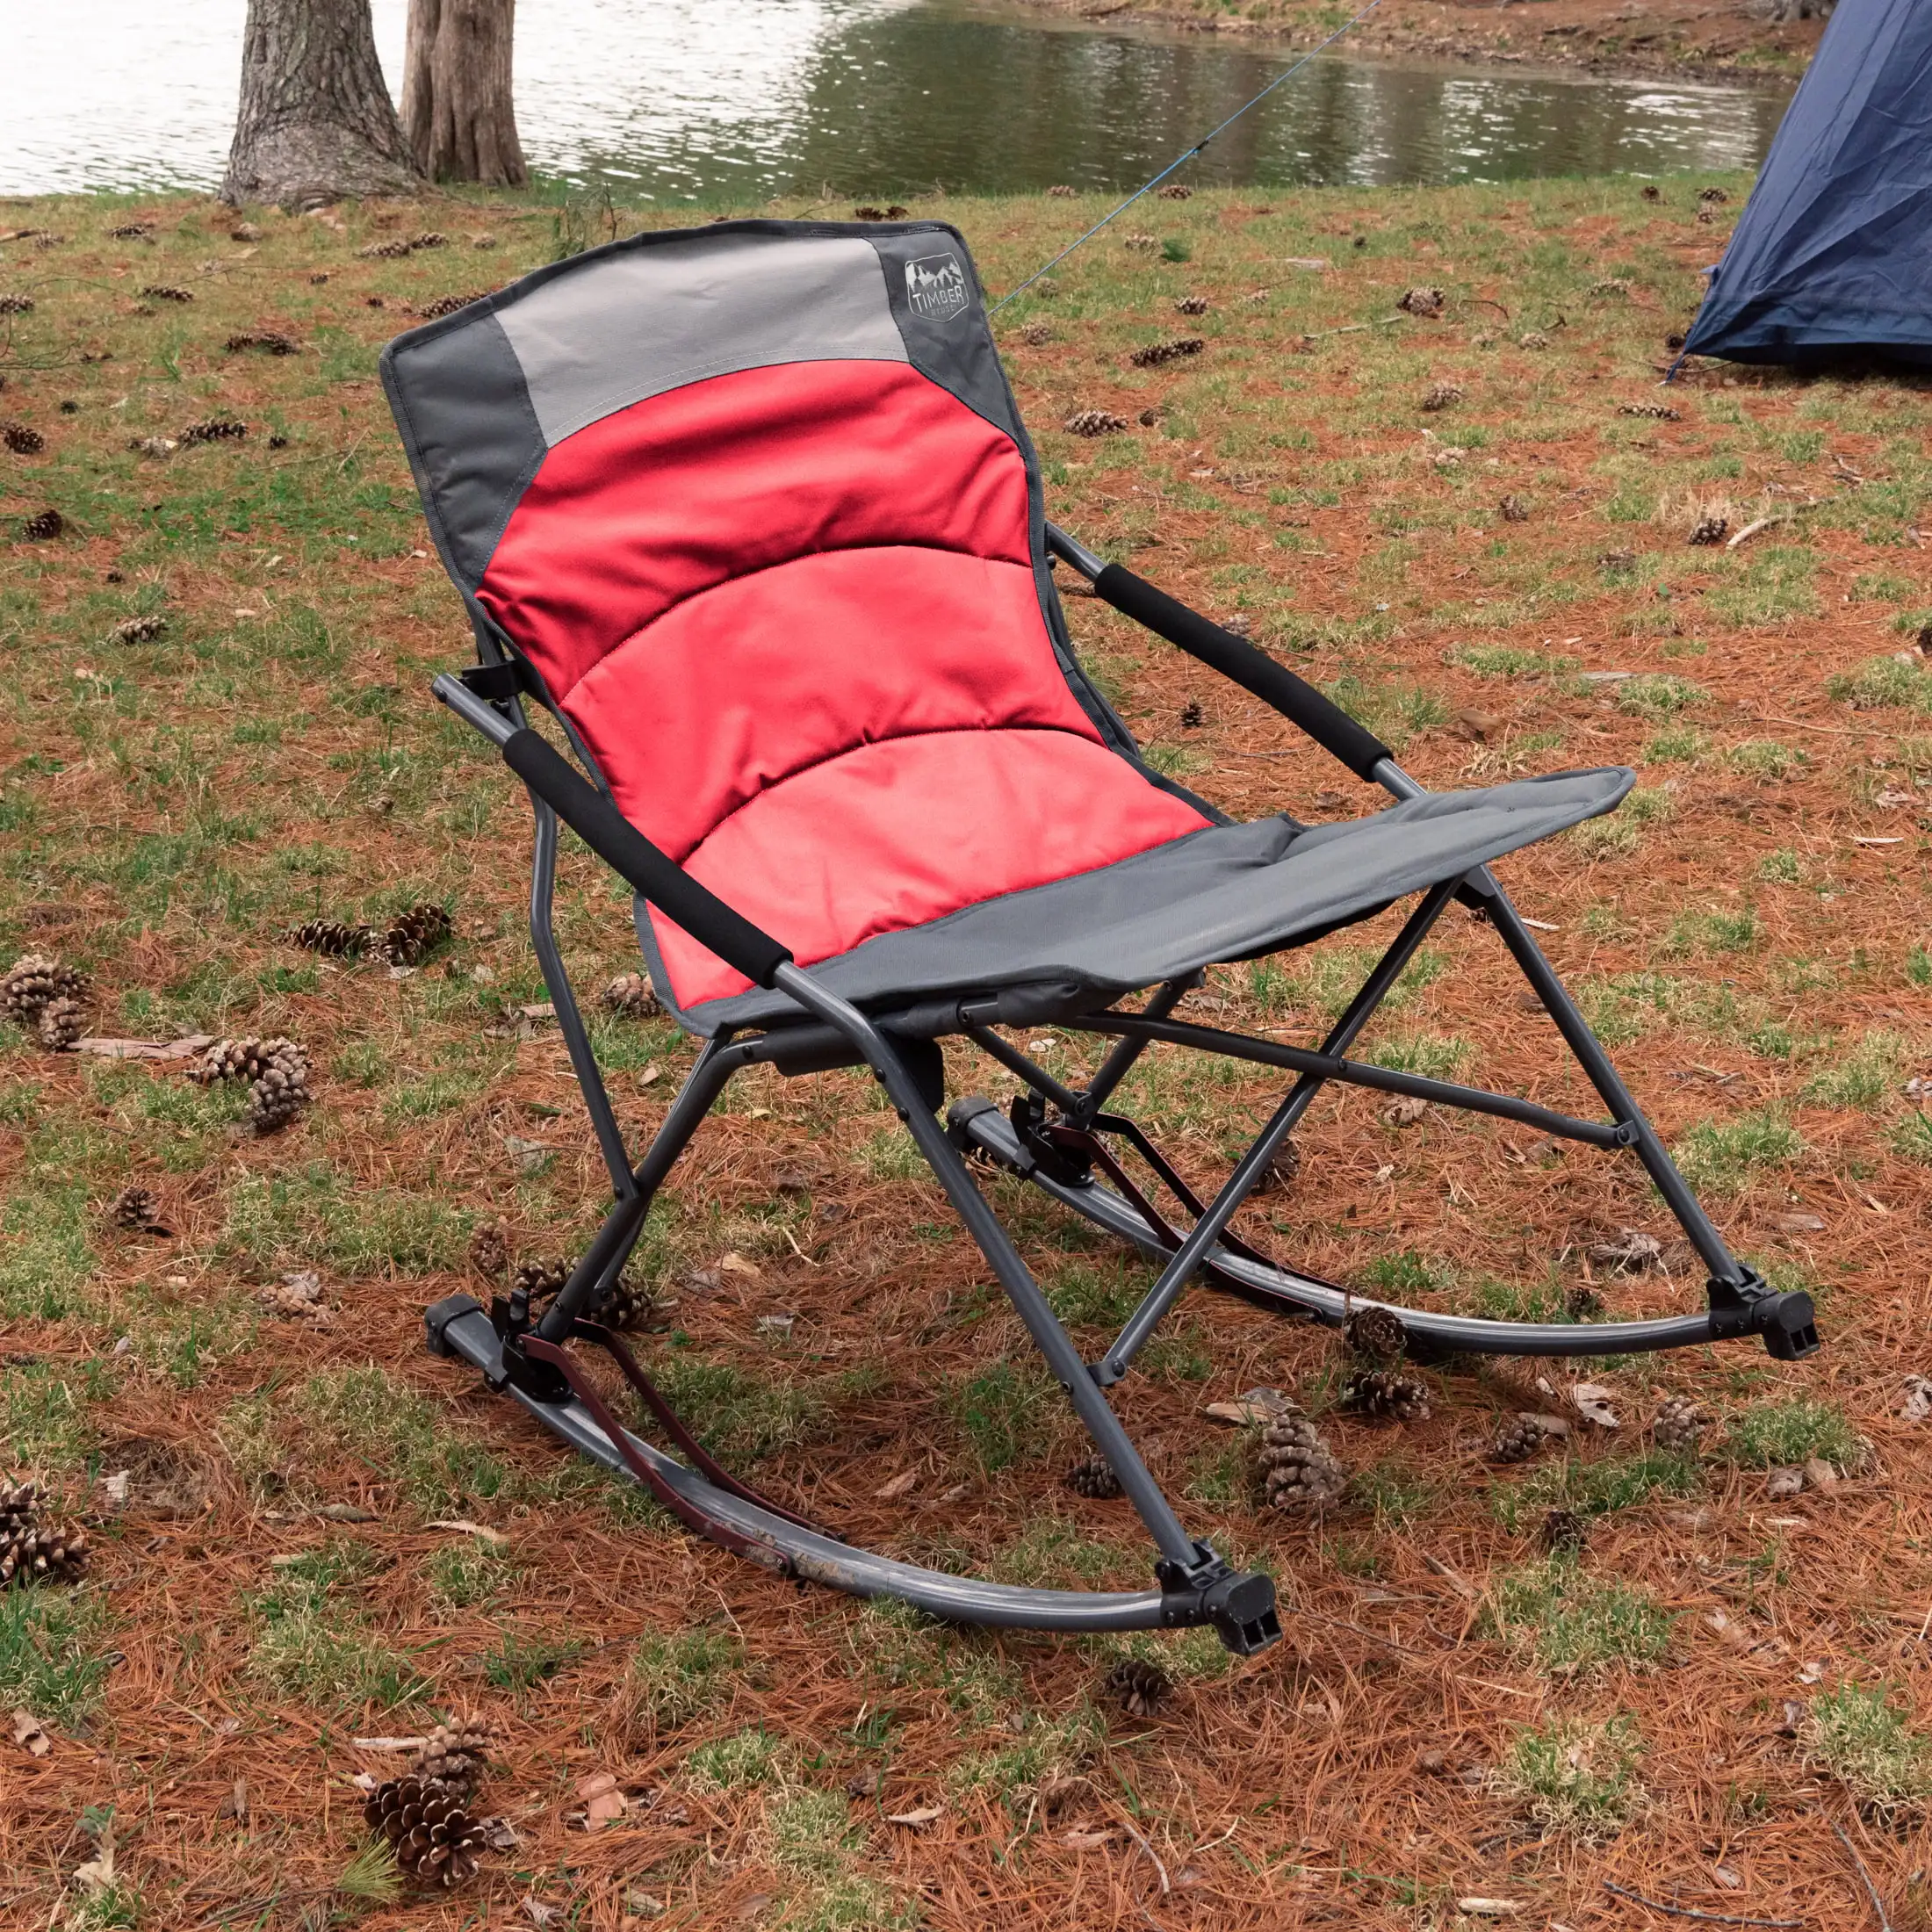 

Catalpa Relax and Rocking Camping Chair - Red and Gray - Adult-Sized Chair for Relaxation and Rocking Comfort